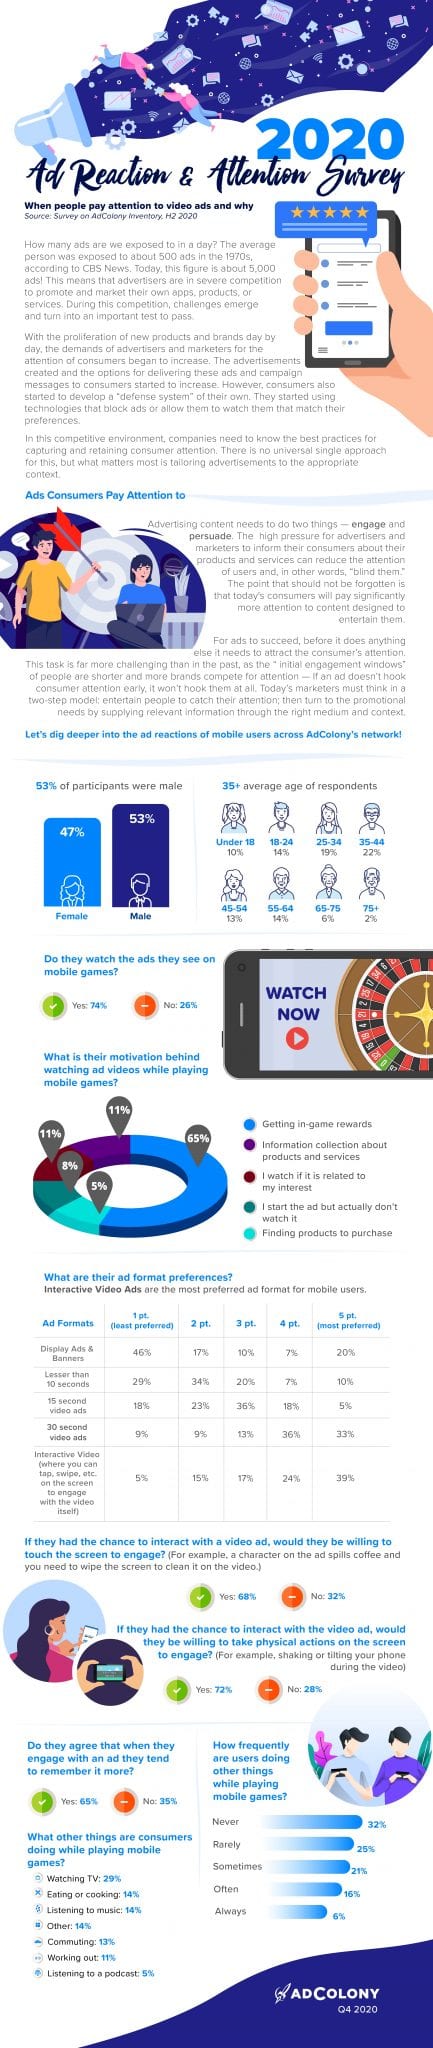 Ad Reaction Attention Survey Infographic